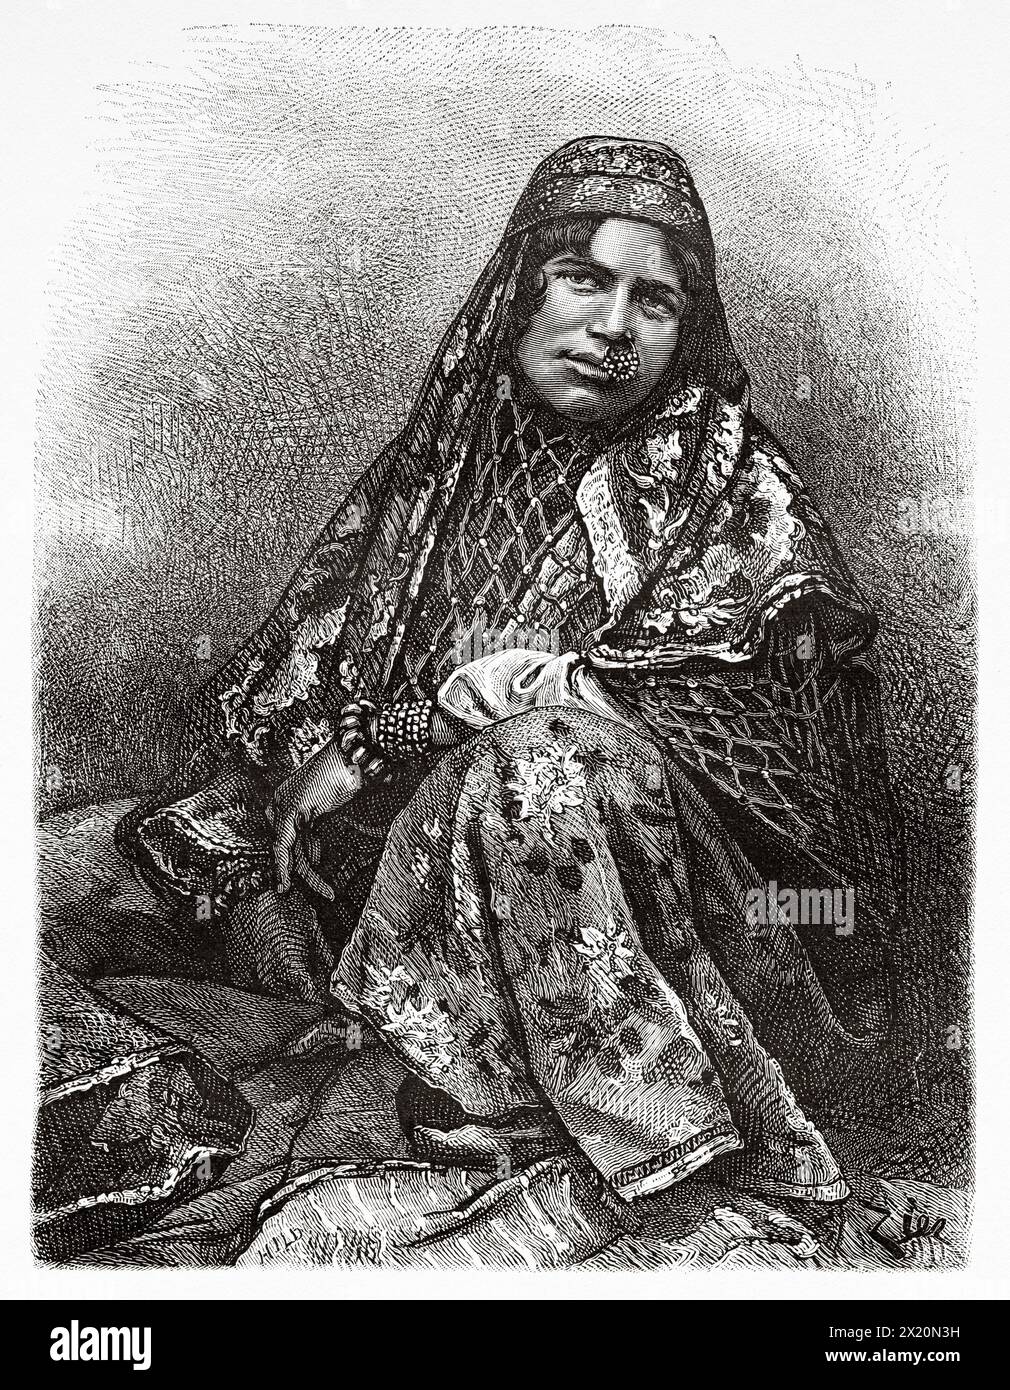 Native woman from Dezful dressed in traditional costume, Iran. Middle East. Drawing by Edouard Zier (1856 - 1924) Persia, Chaldea and Susiana 1881-1882 by Jane Dieulafoy (1851 - 1916) Le Tour du Monde 1886 Stock Photo